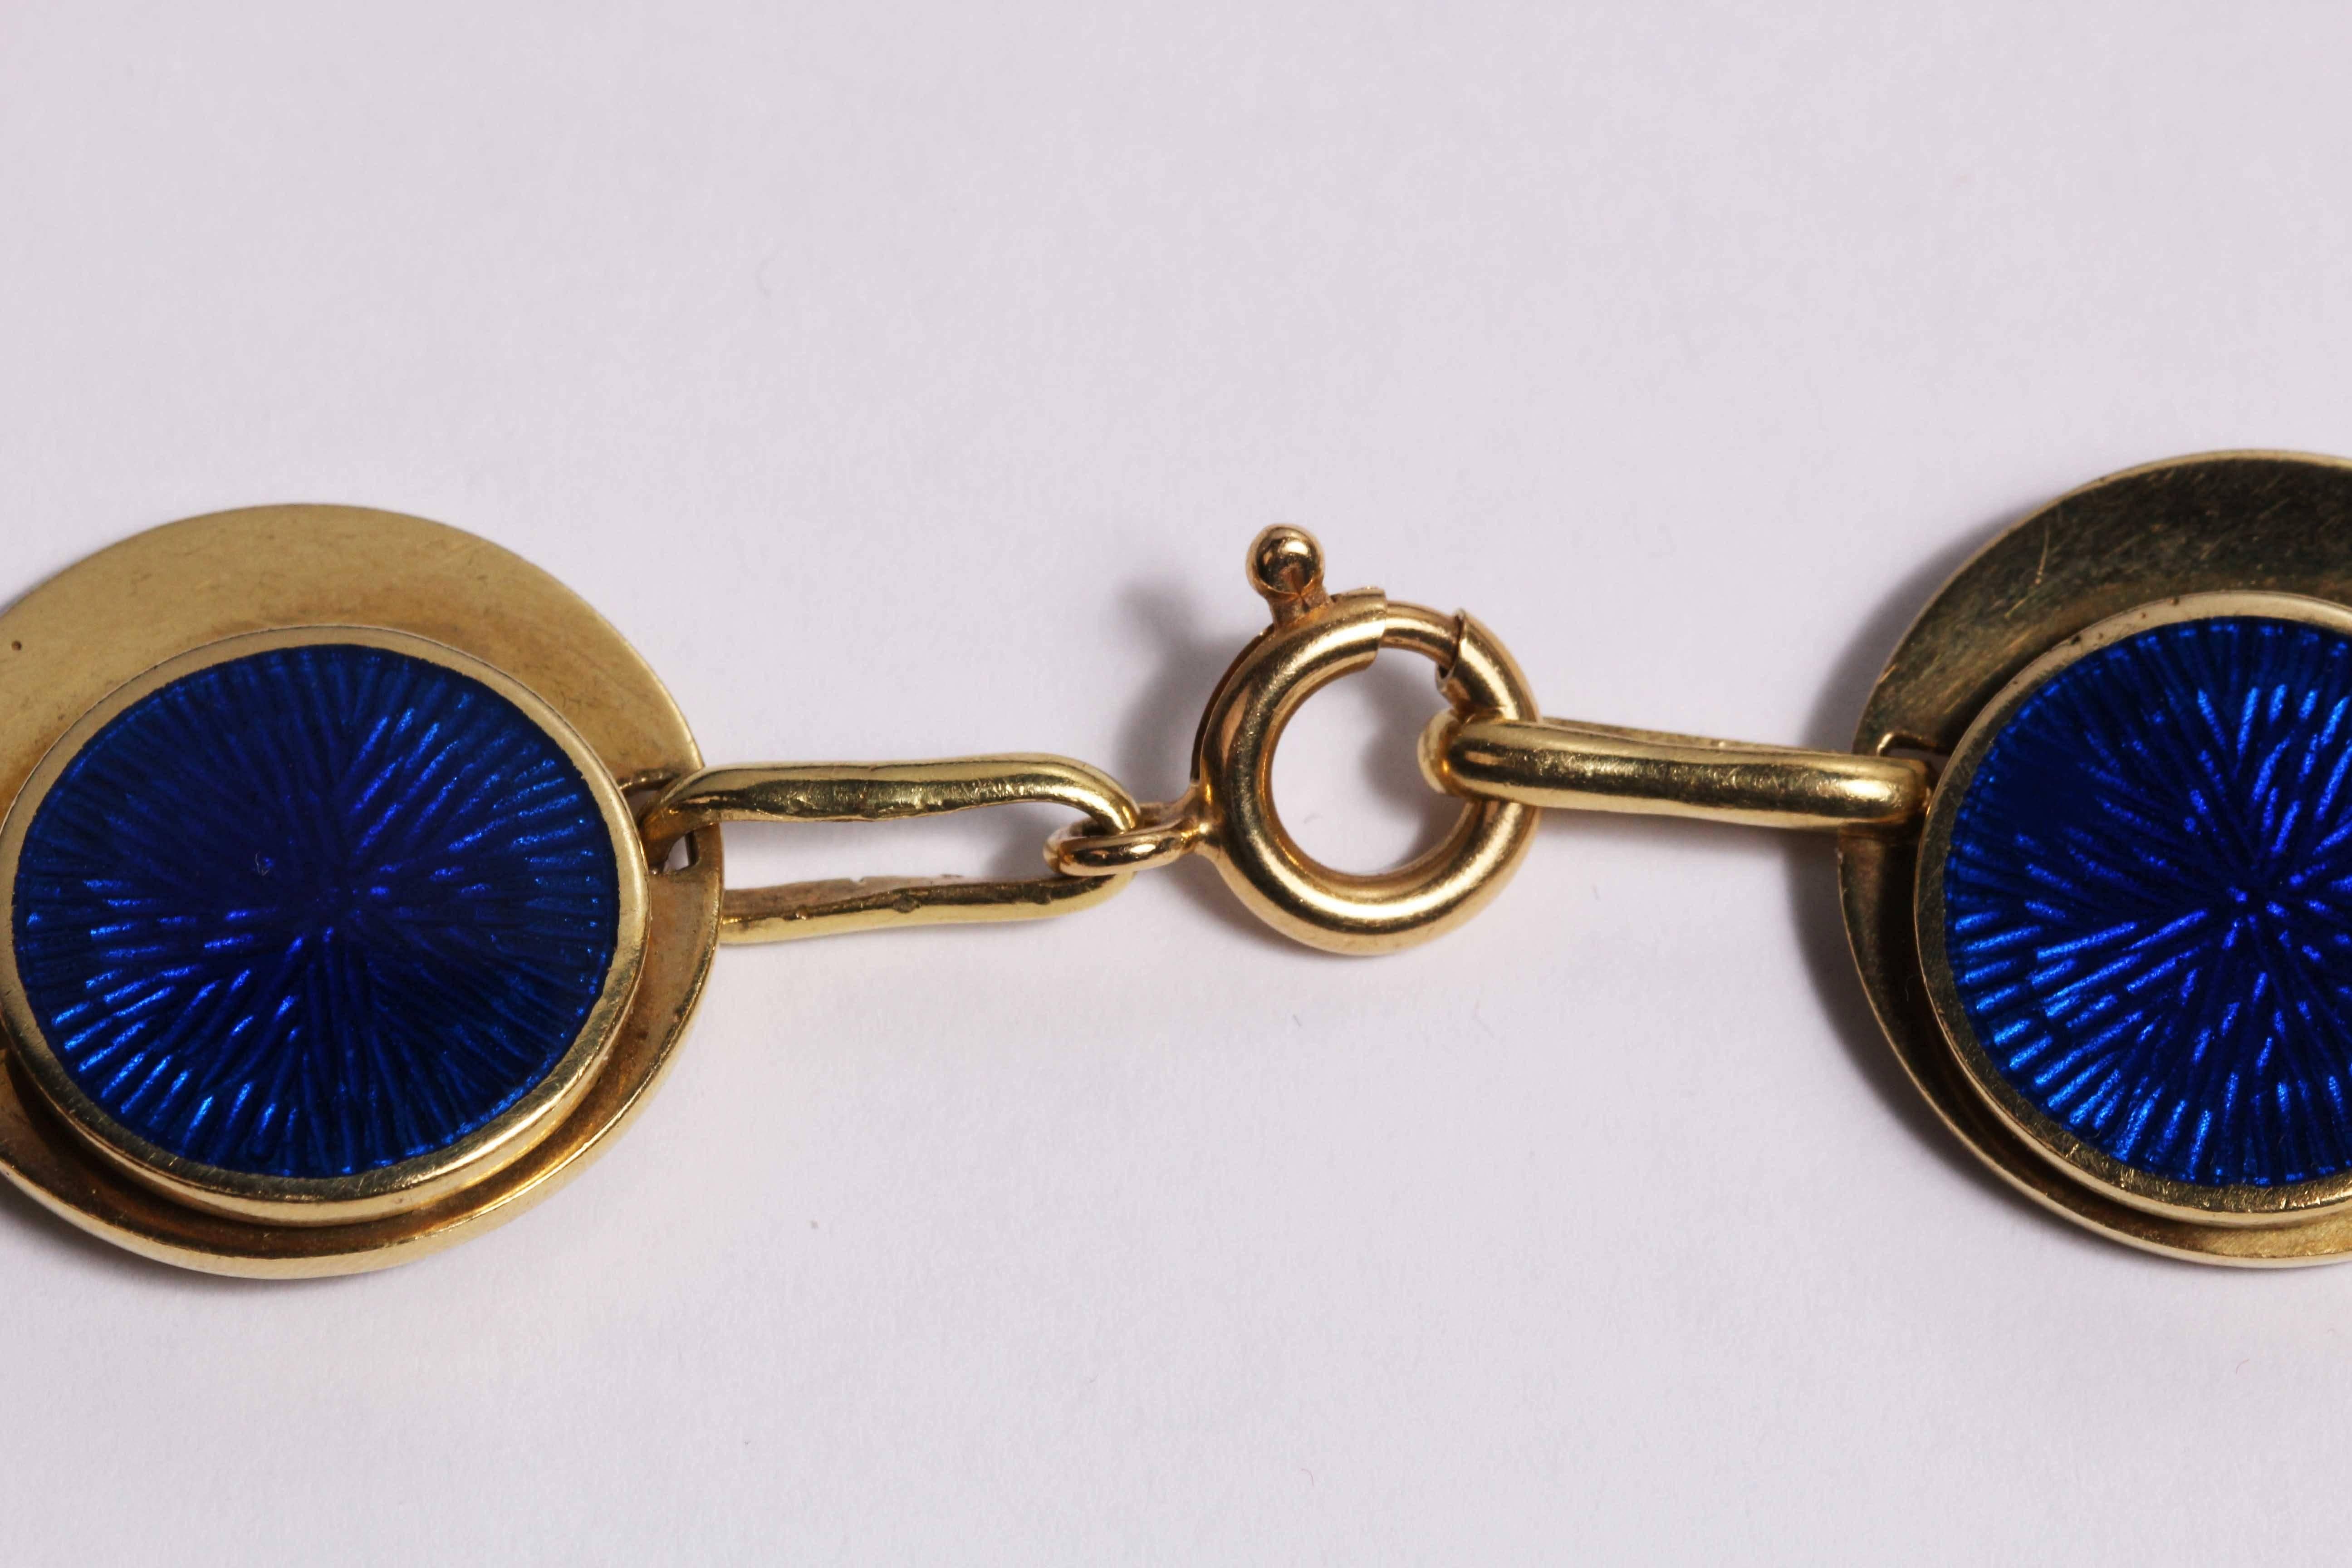 Italian 18 ct gold with royal blue fired enamel.
1950-1960 circa.
Total weight: 96.38 g
Total lenght: 59.50 cm